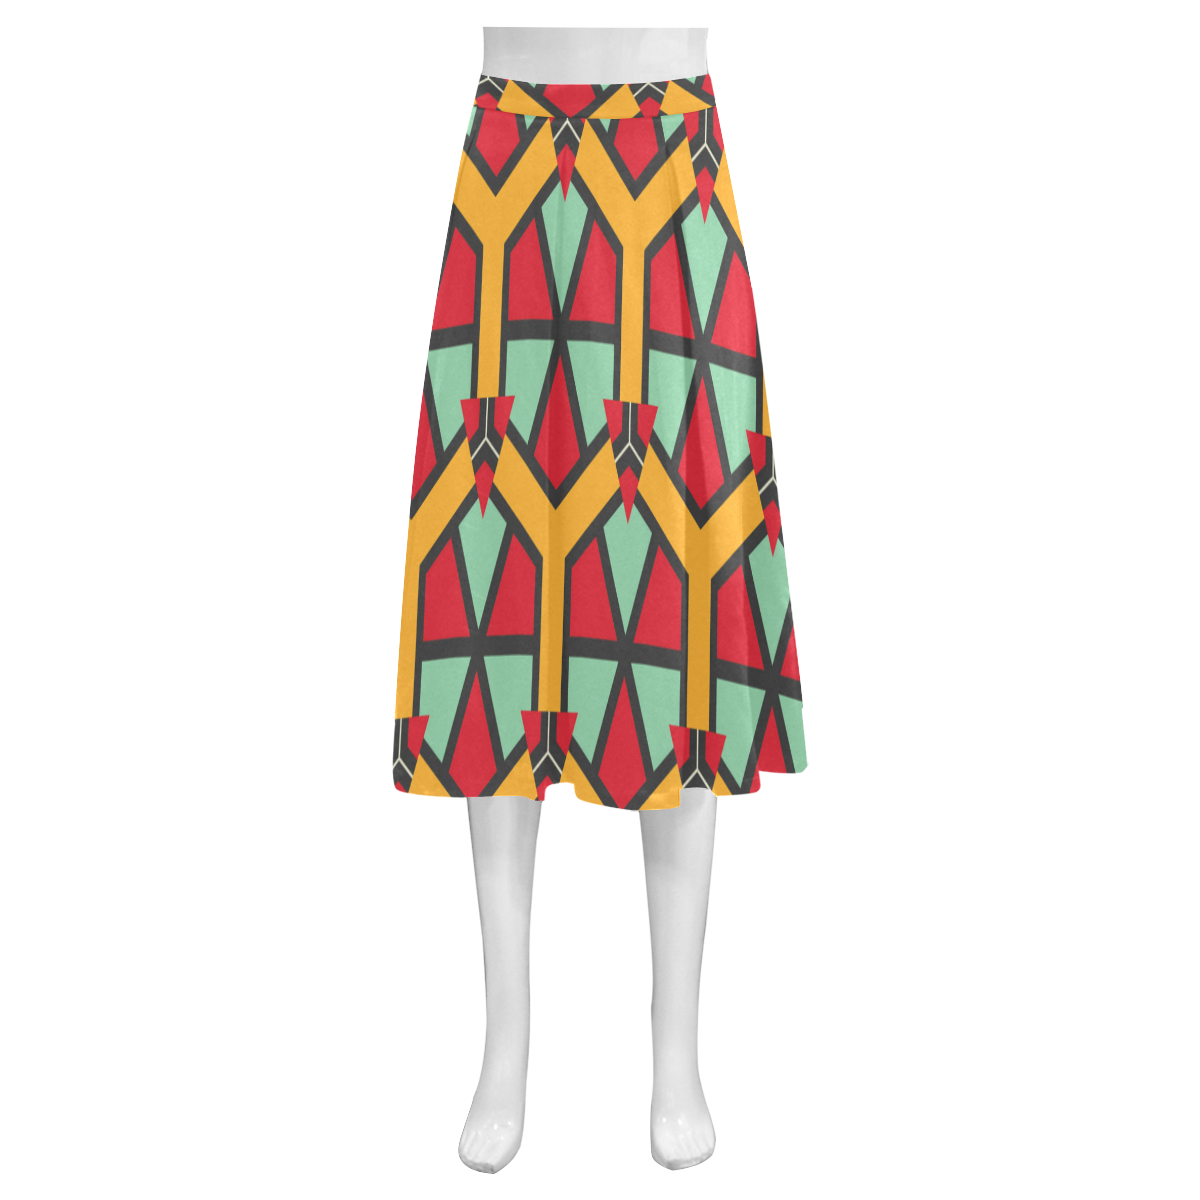 Honeycombs triangles and other shapes pattern Mnemosyne Women's Crepe Skirt (Model D16)